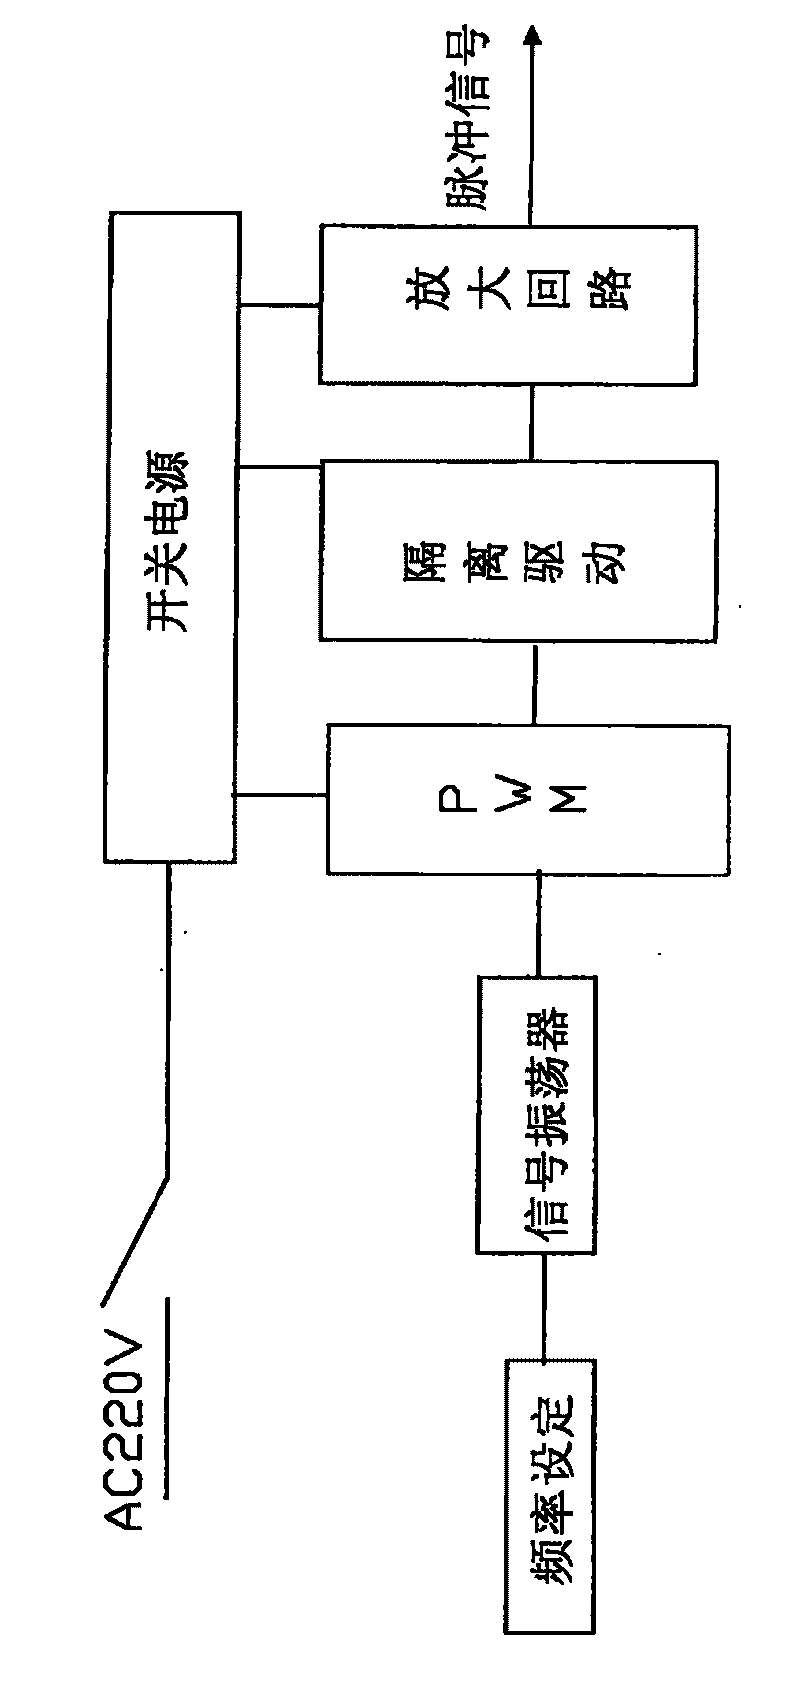 Signal generation circuit for testing hall device electrical behavior